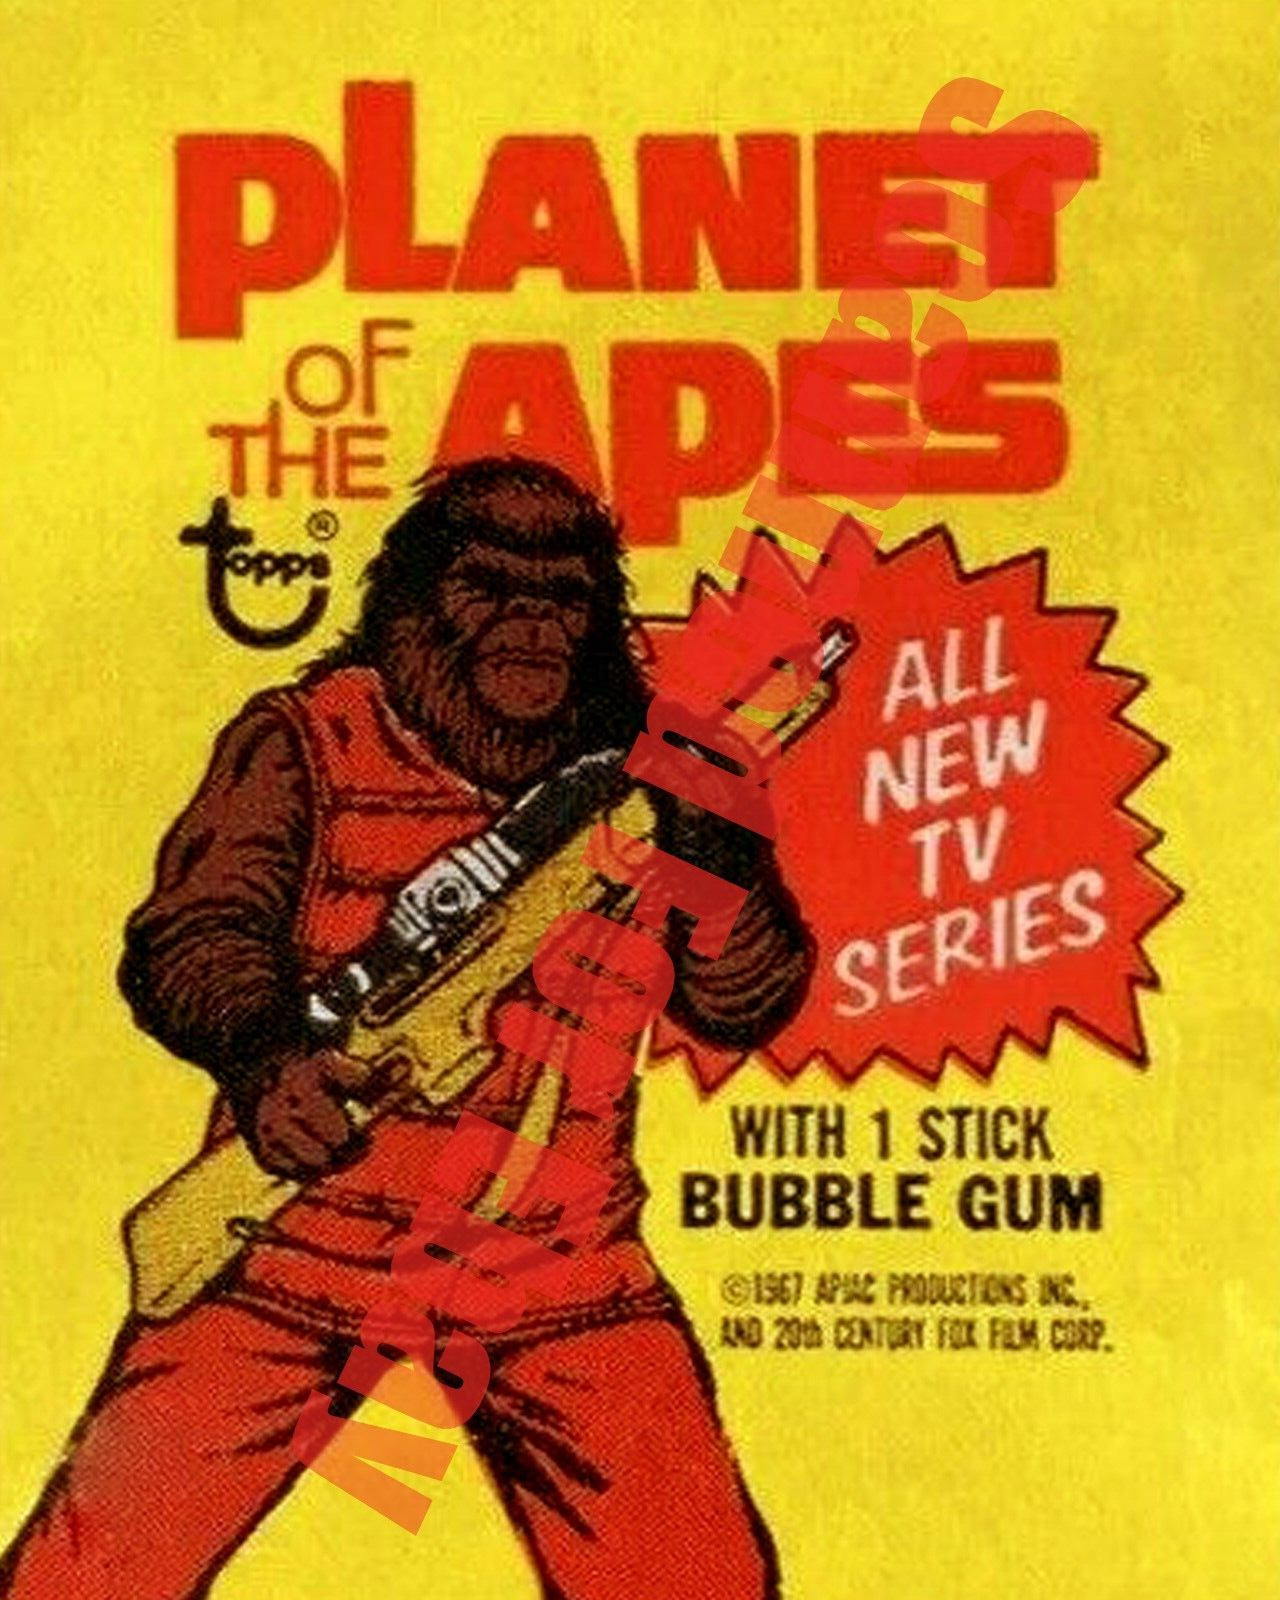 1975 TOPPS Planet Apes TV Series Card Wax Pack Bubble Gum Wrapper 8x10 Photo